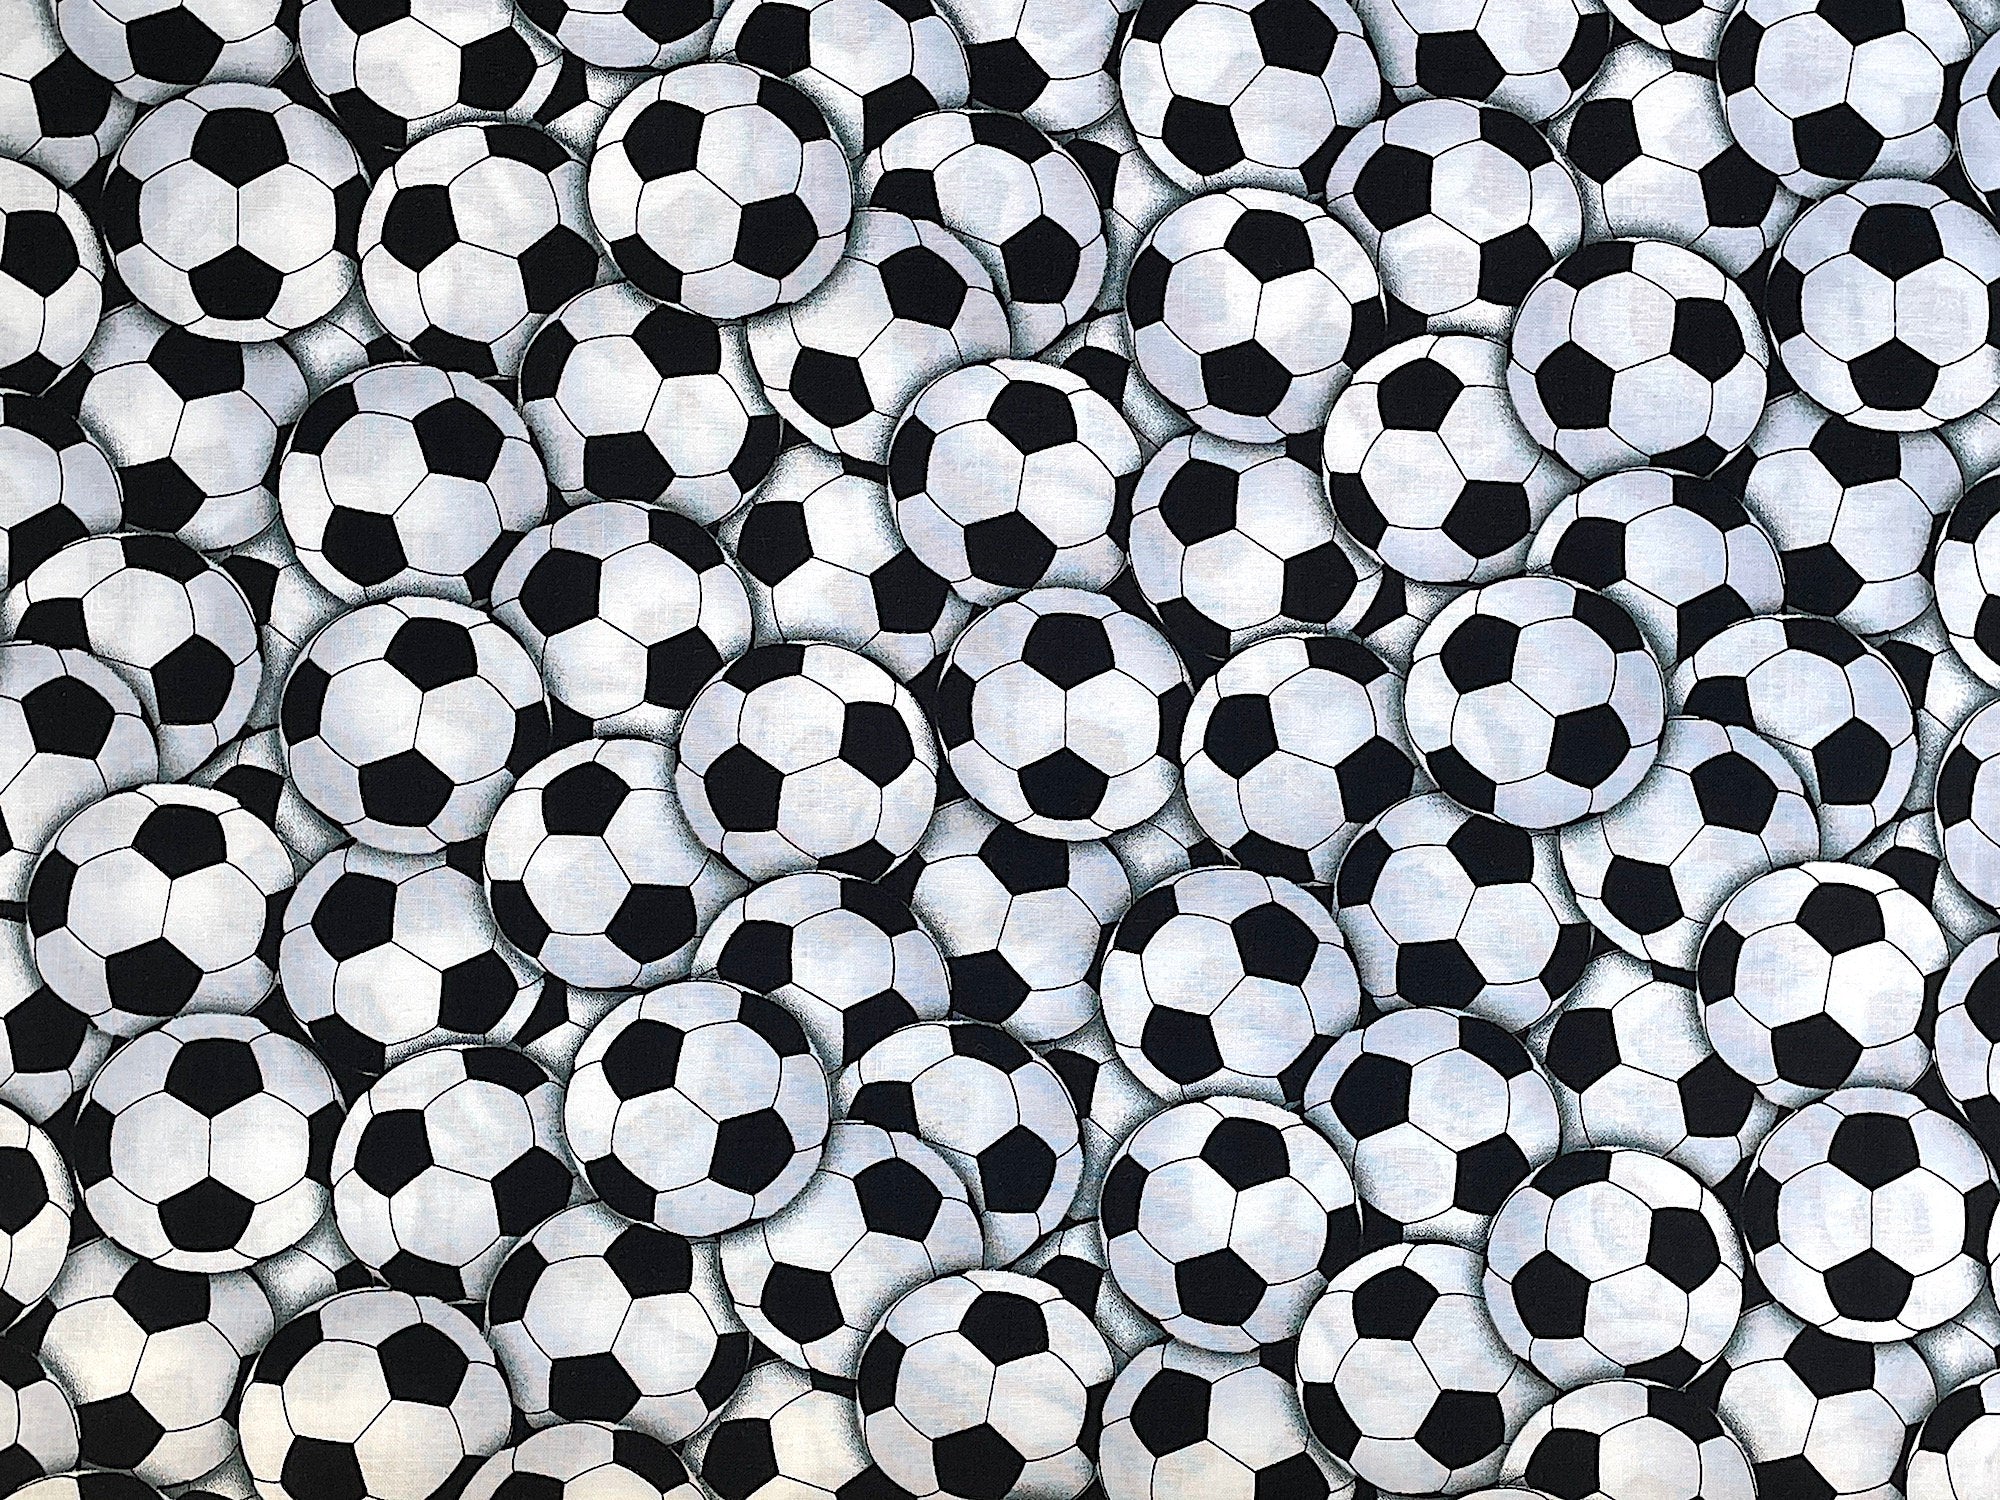 Cotton fabric covered with soccer balls.